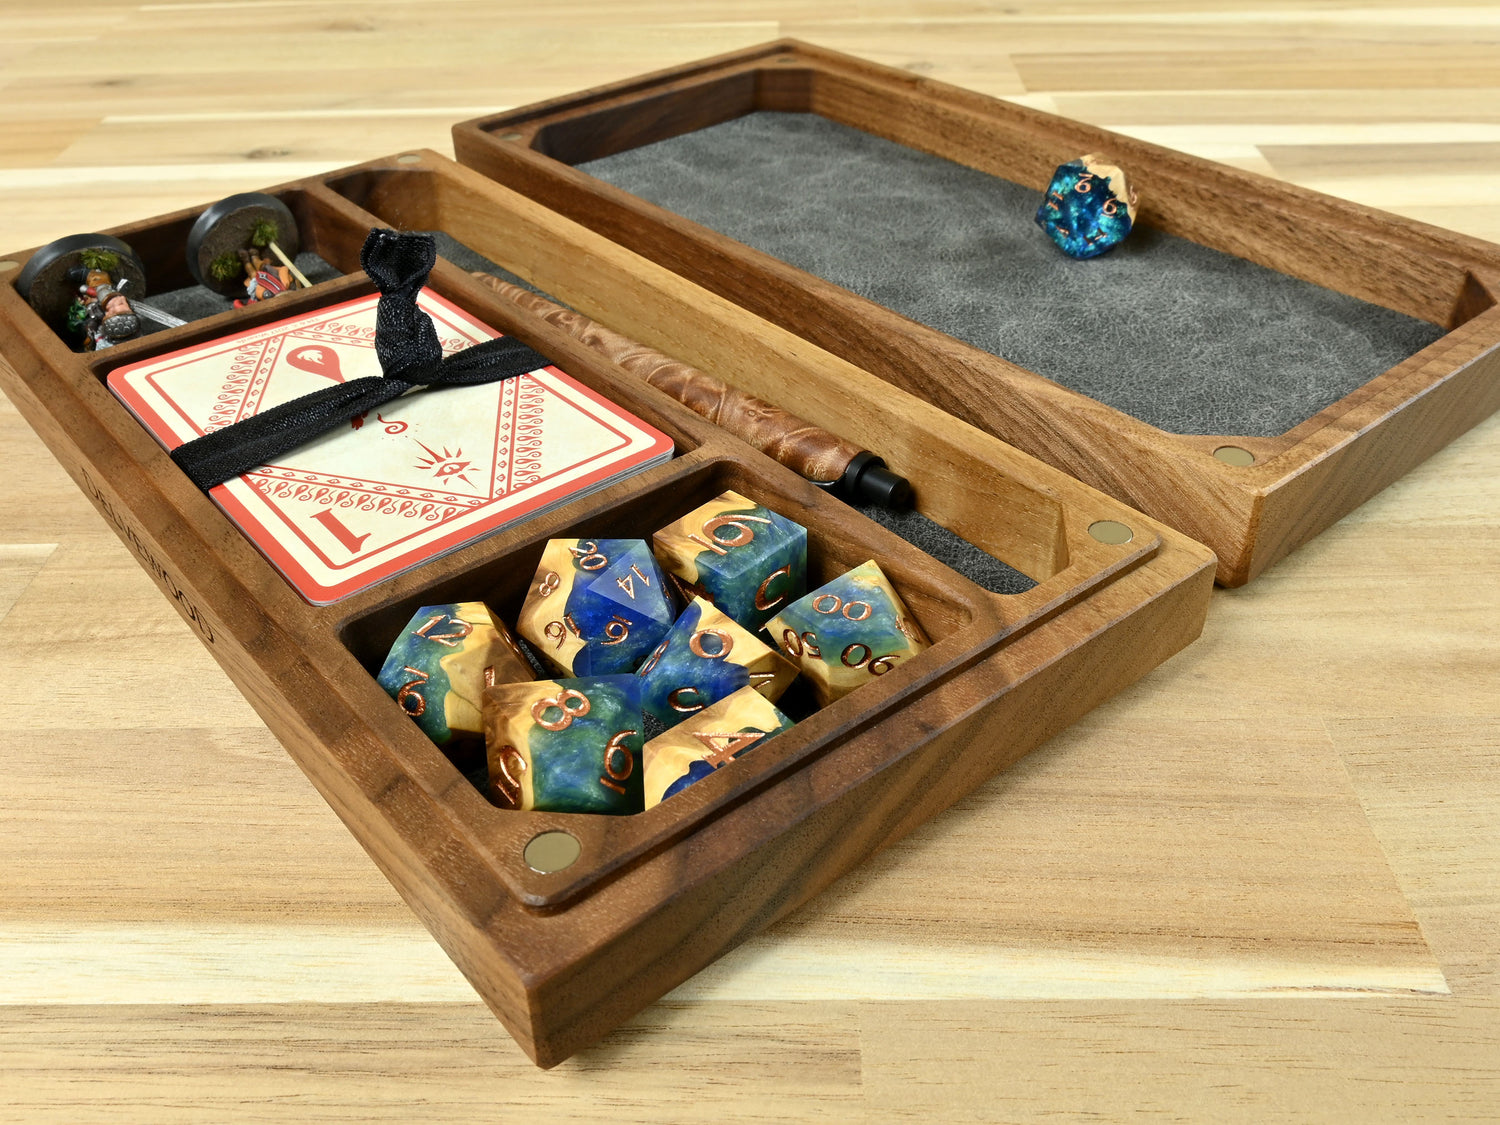 Delver Dice Box and Tray for dnd rpg